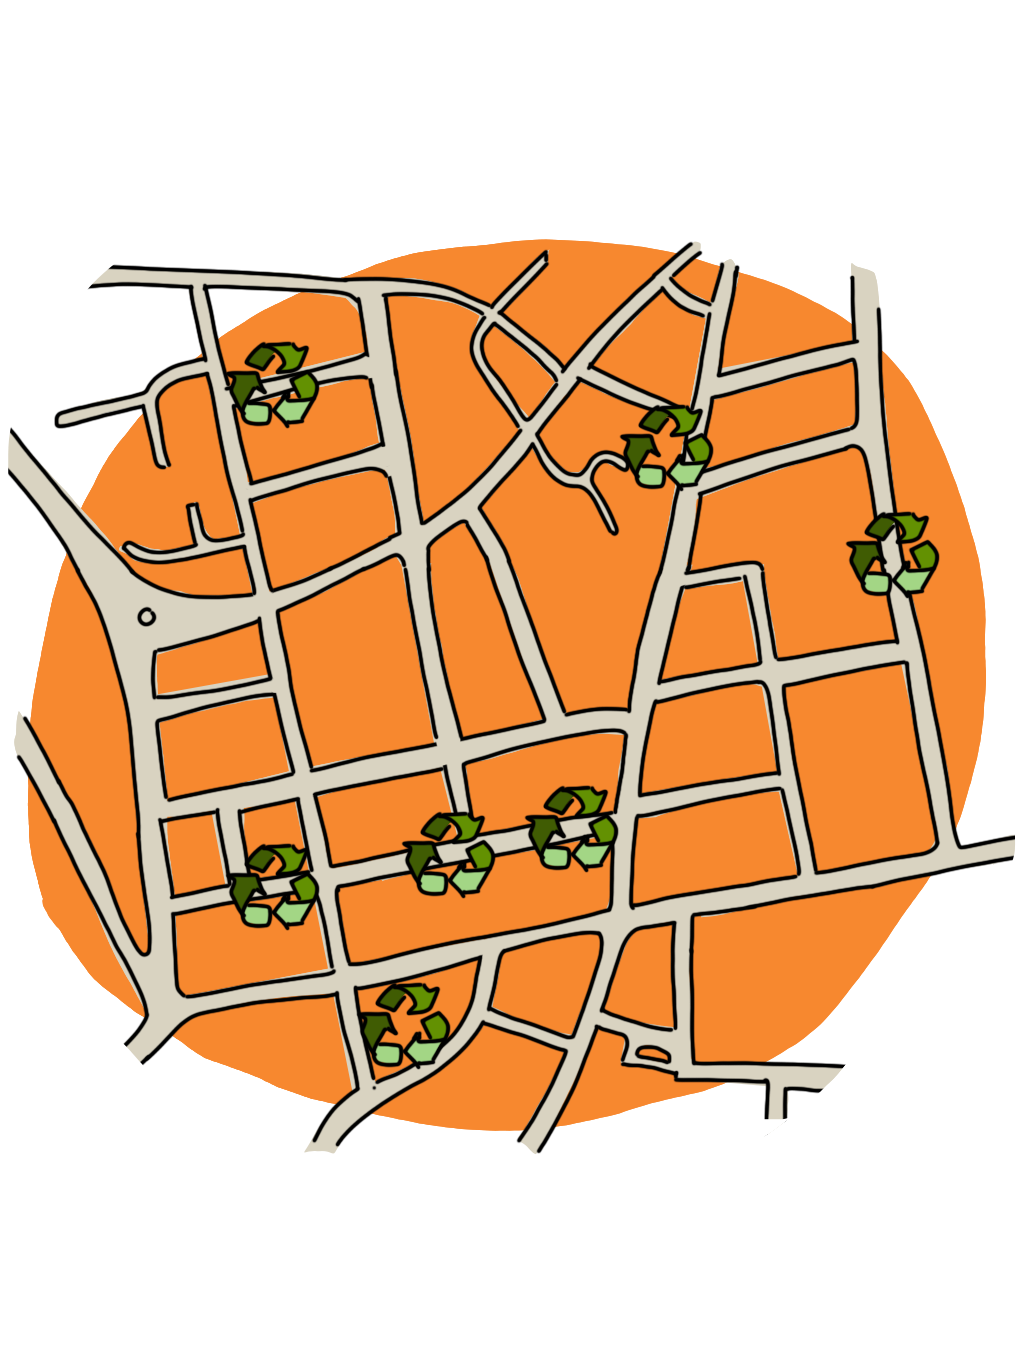 illustration of street grid with recycling points